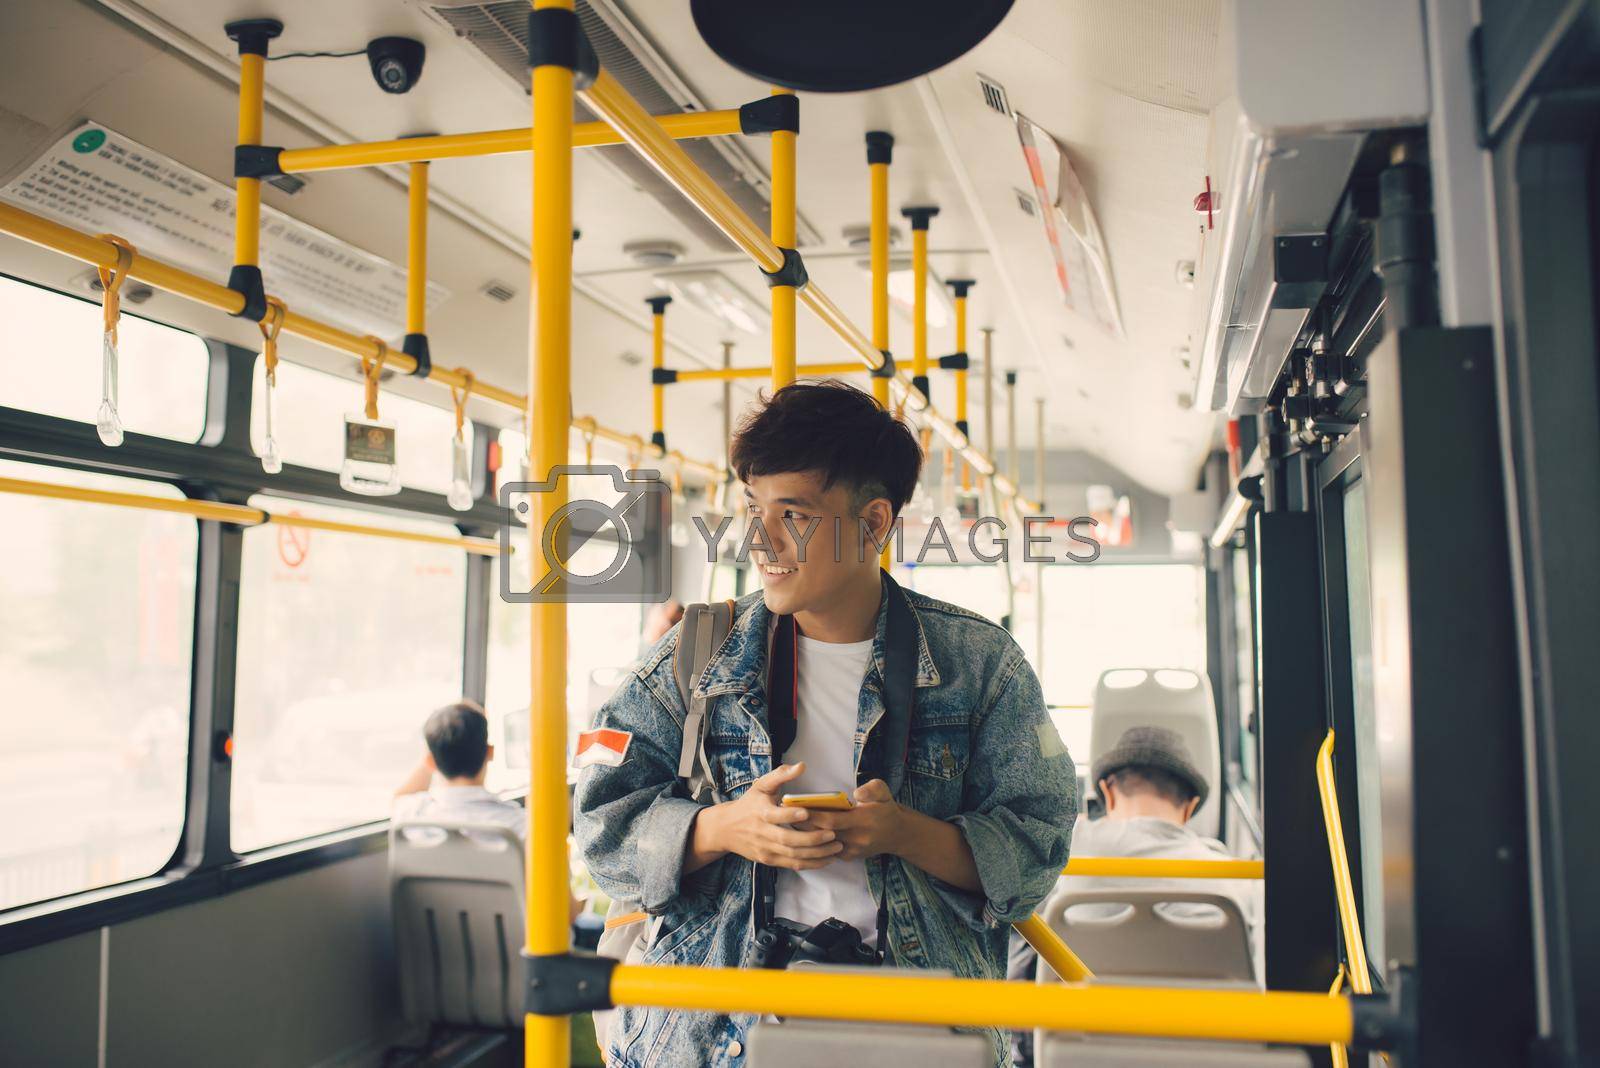 Royalty free image of People in the bus. Asian man using smartphone in public transport by makidotvn